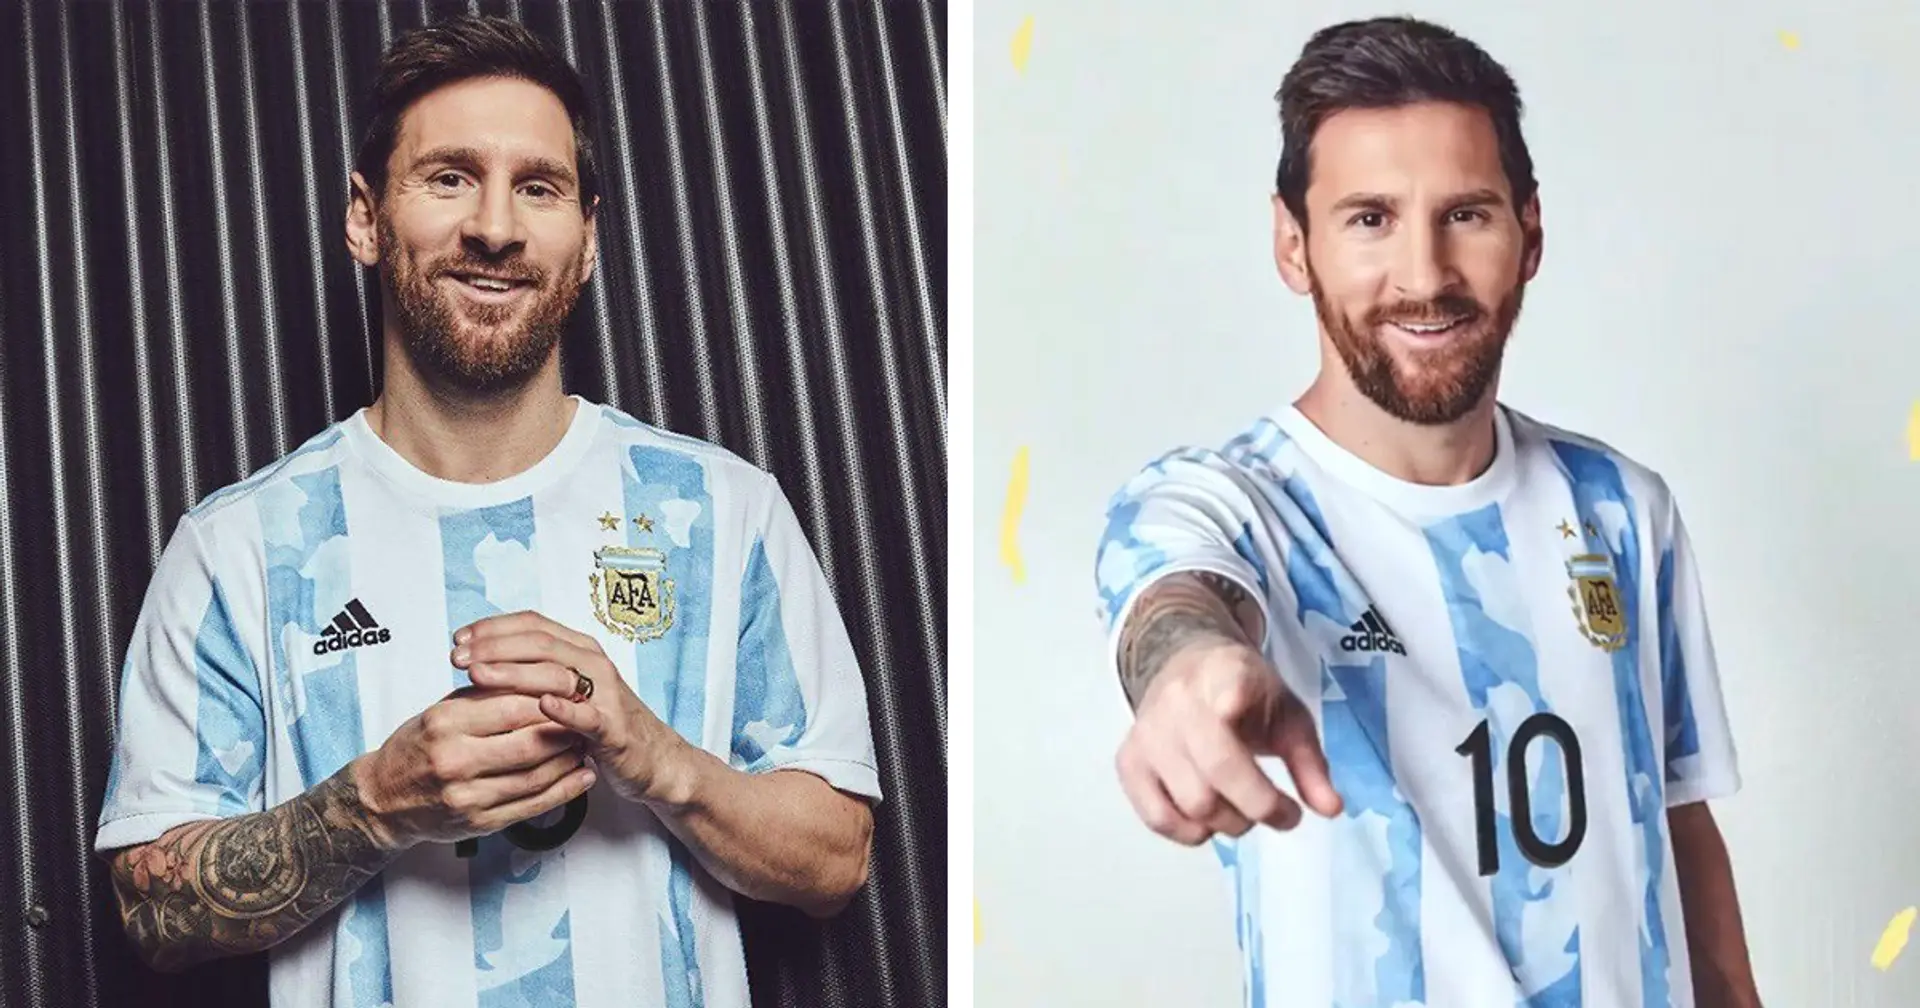 Ready for big action: Messi unveils brand new Argentina jersey